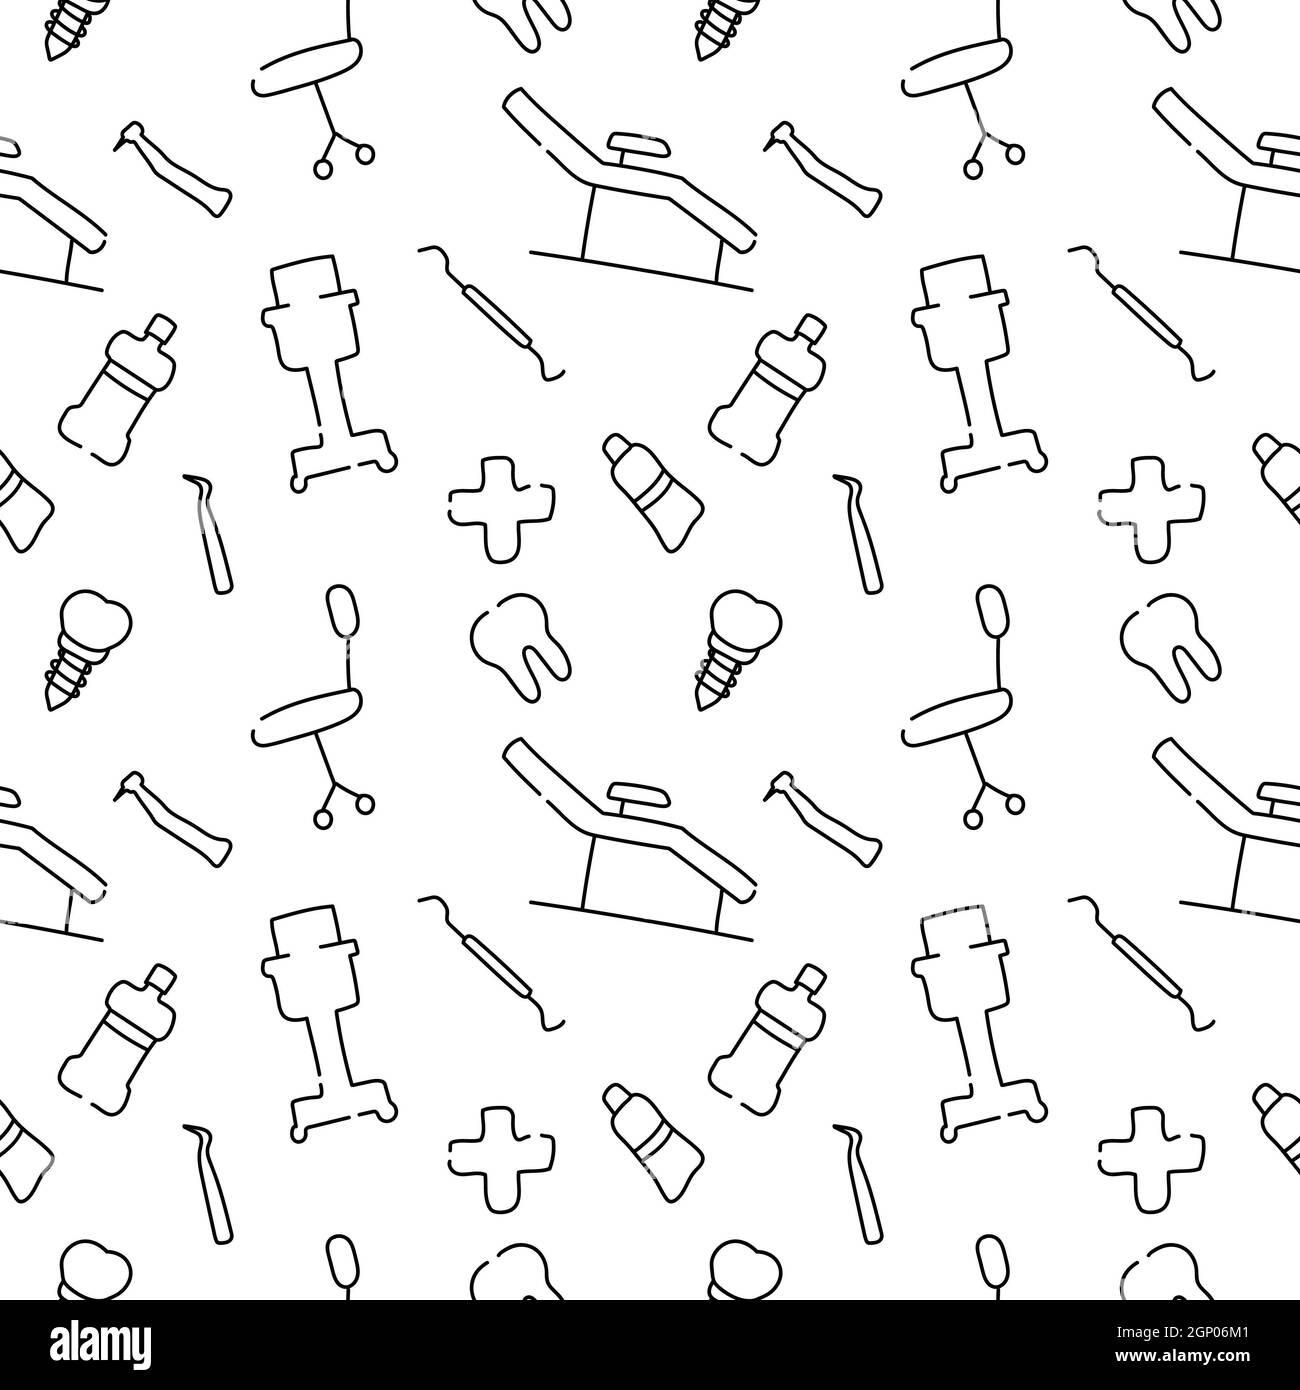 Dental care, Orthodontics Seamless Pattern with Line Icons. Dentist, Medical Equipment, Braces, Tooth Prosthesis, Floss, Caries Treatment, Toothpaste. Stock Photo